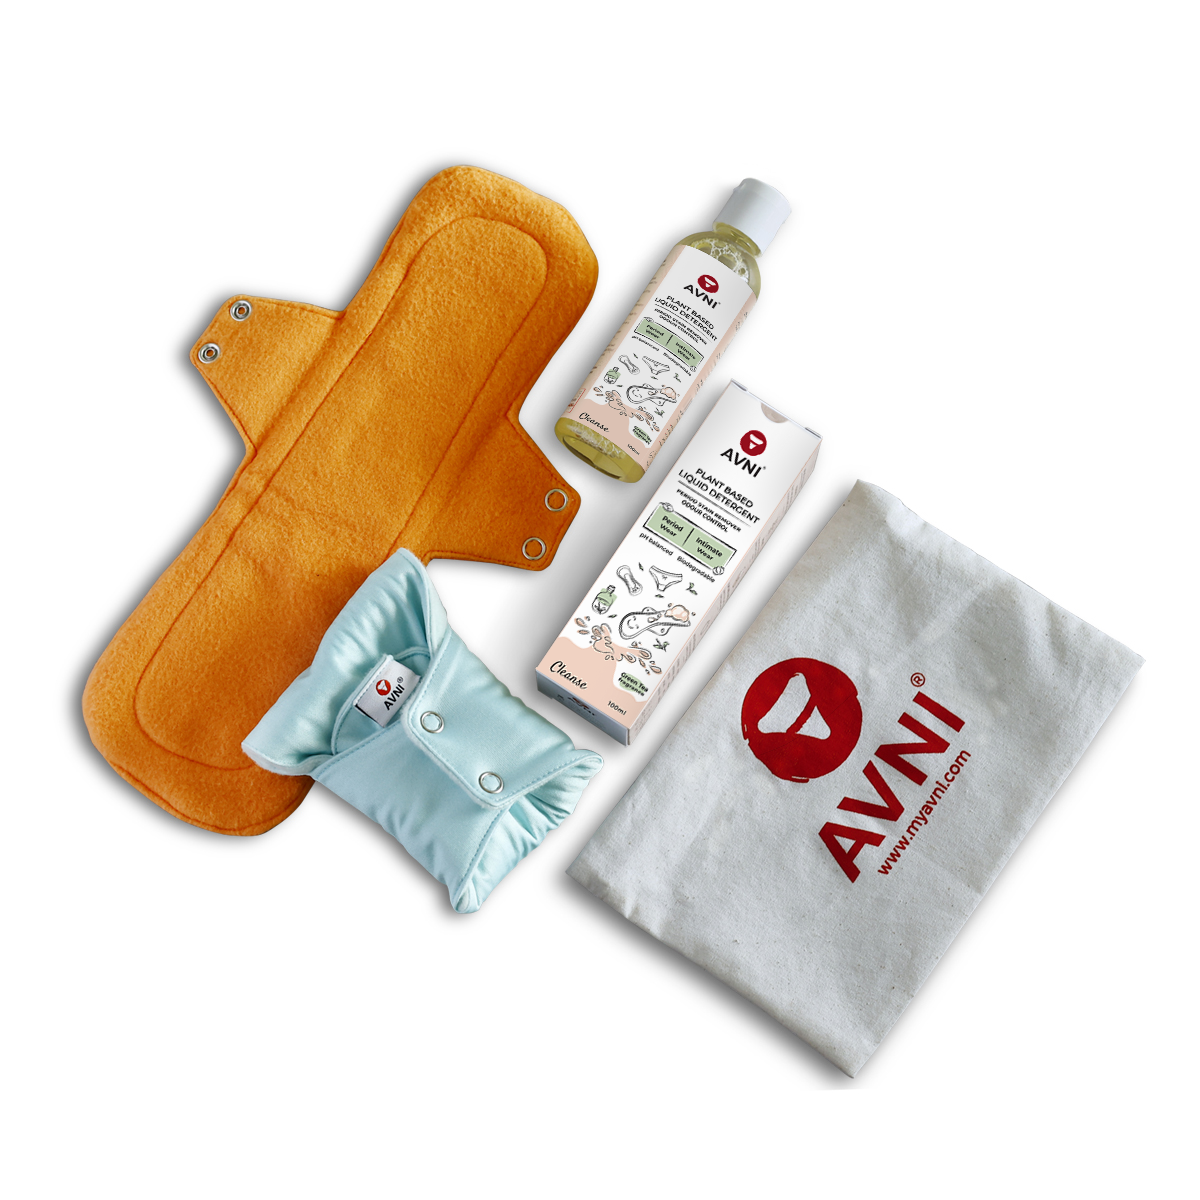 Fluff Reusable Period Pads + Stain Removing Detergent